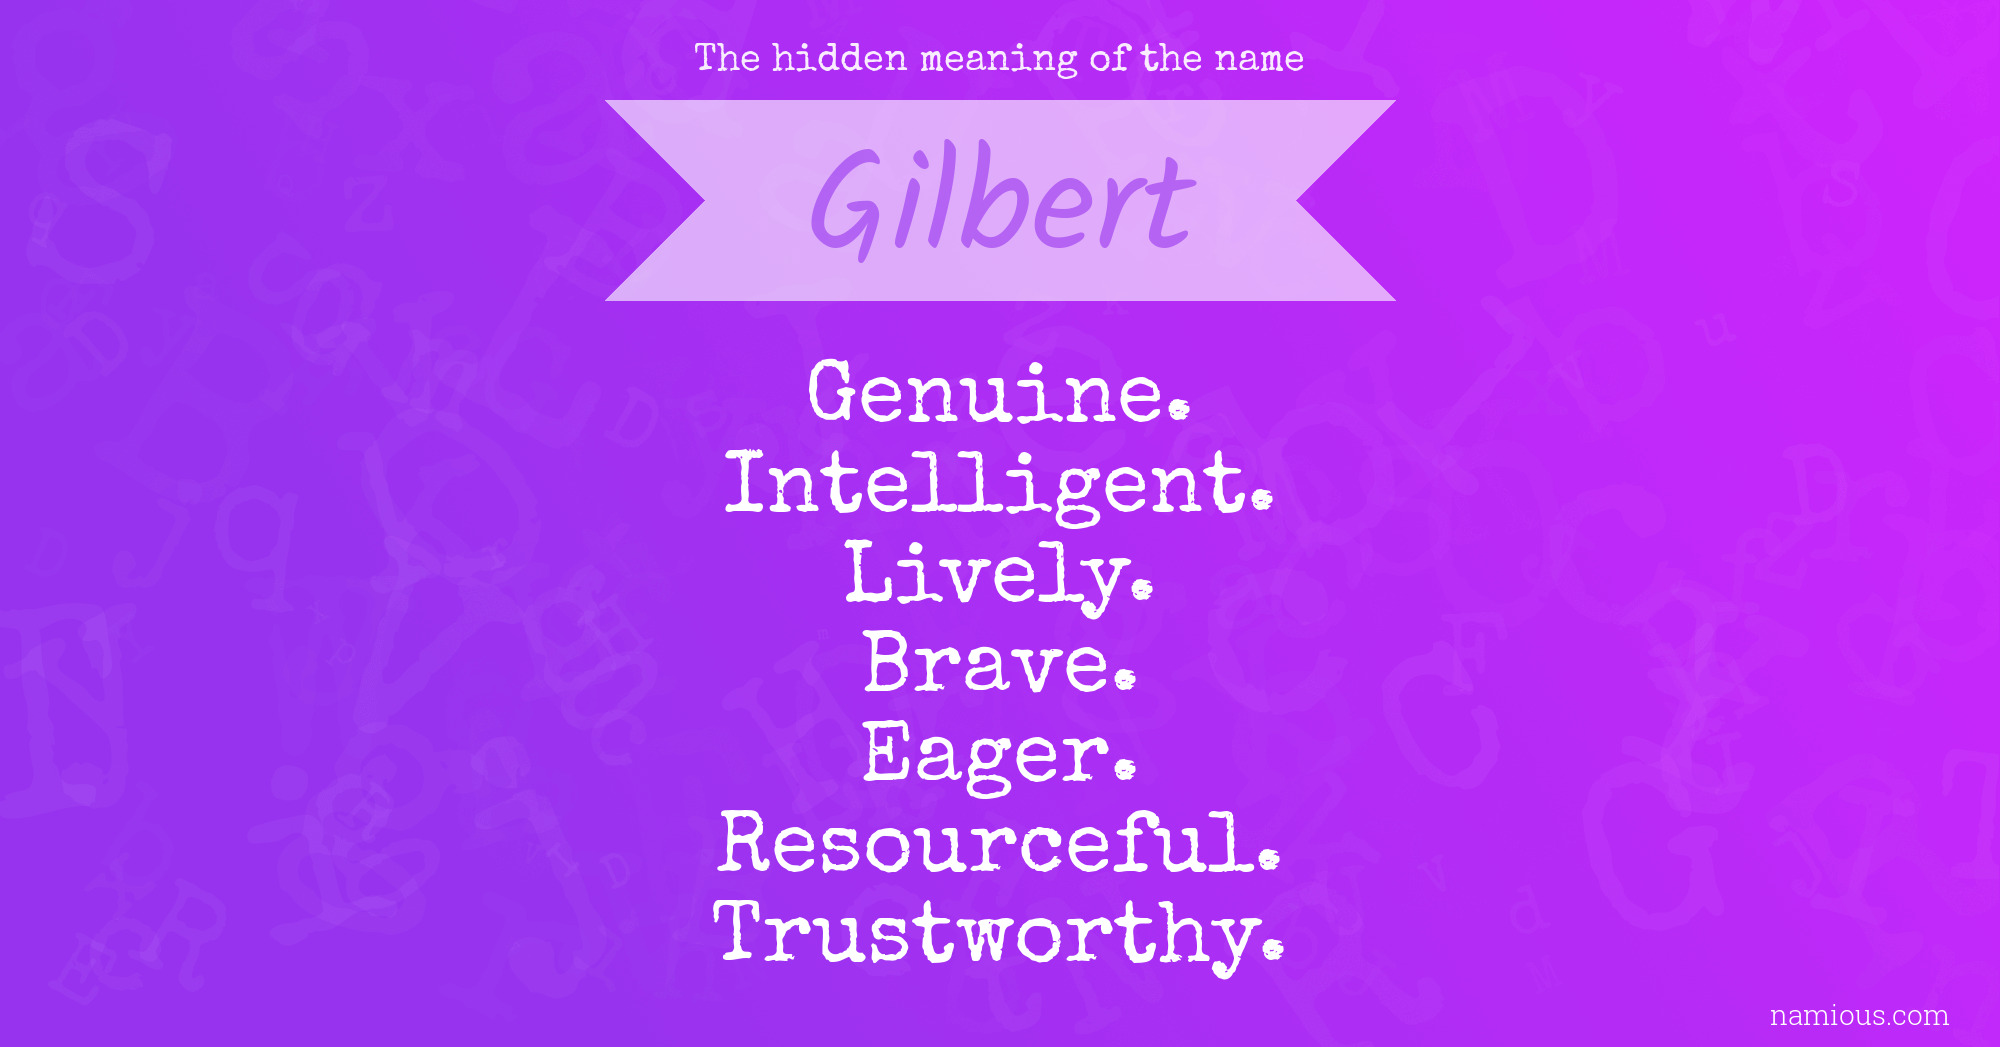 The hidden meaning of the name Gilbert